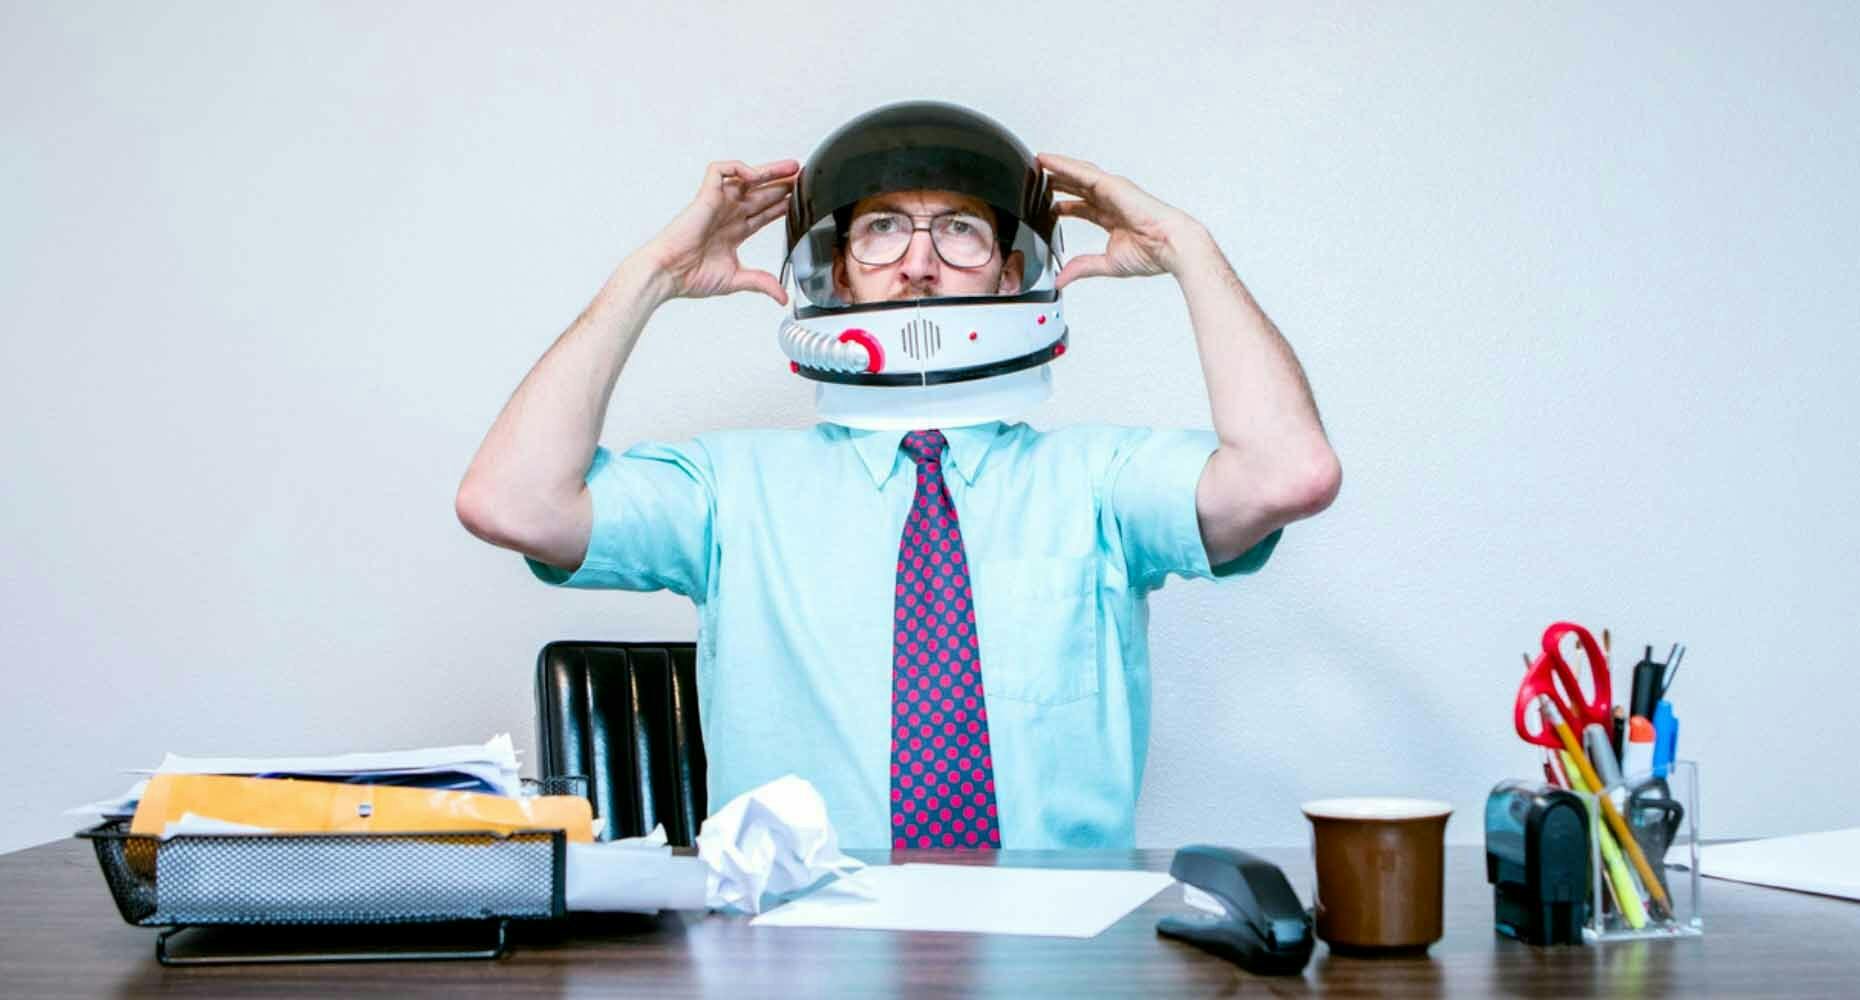 Astronaut sales person sitting at desk